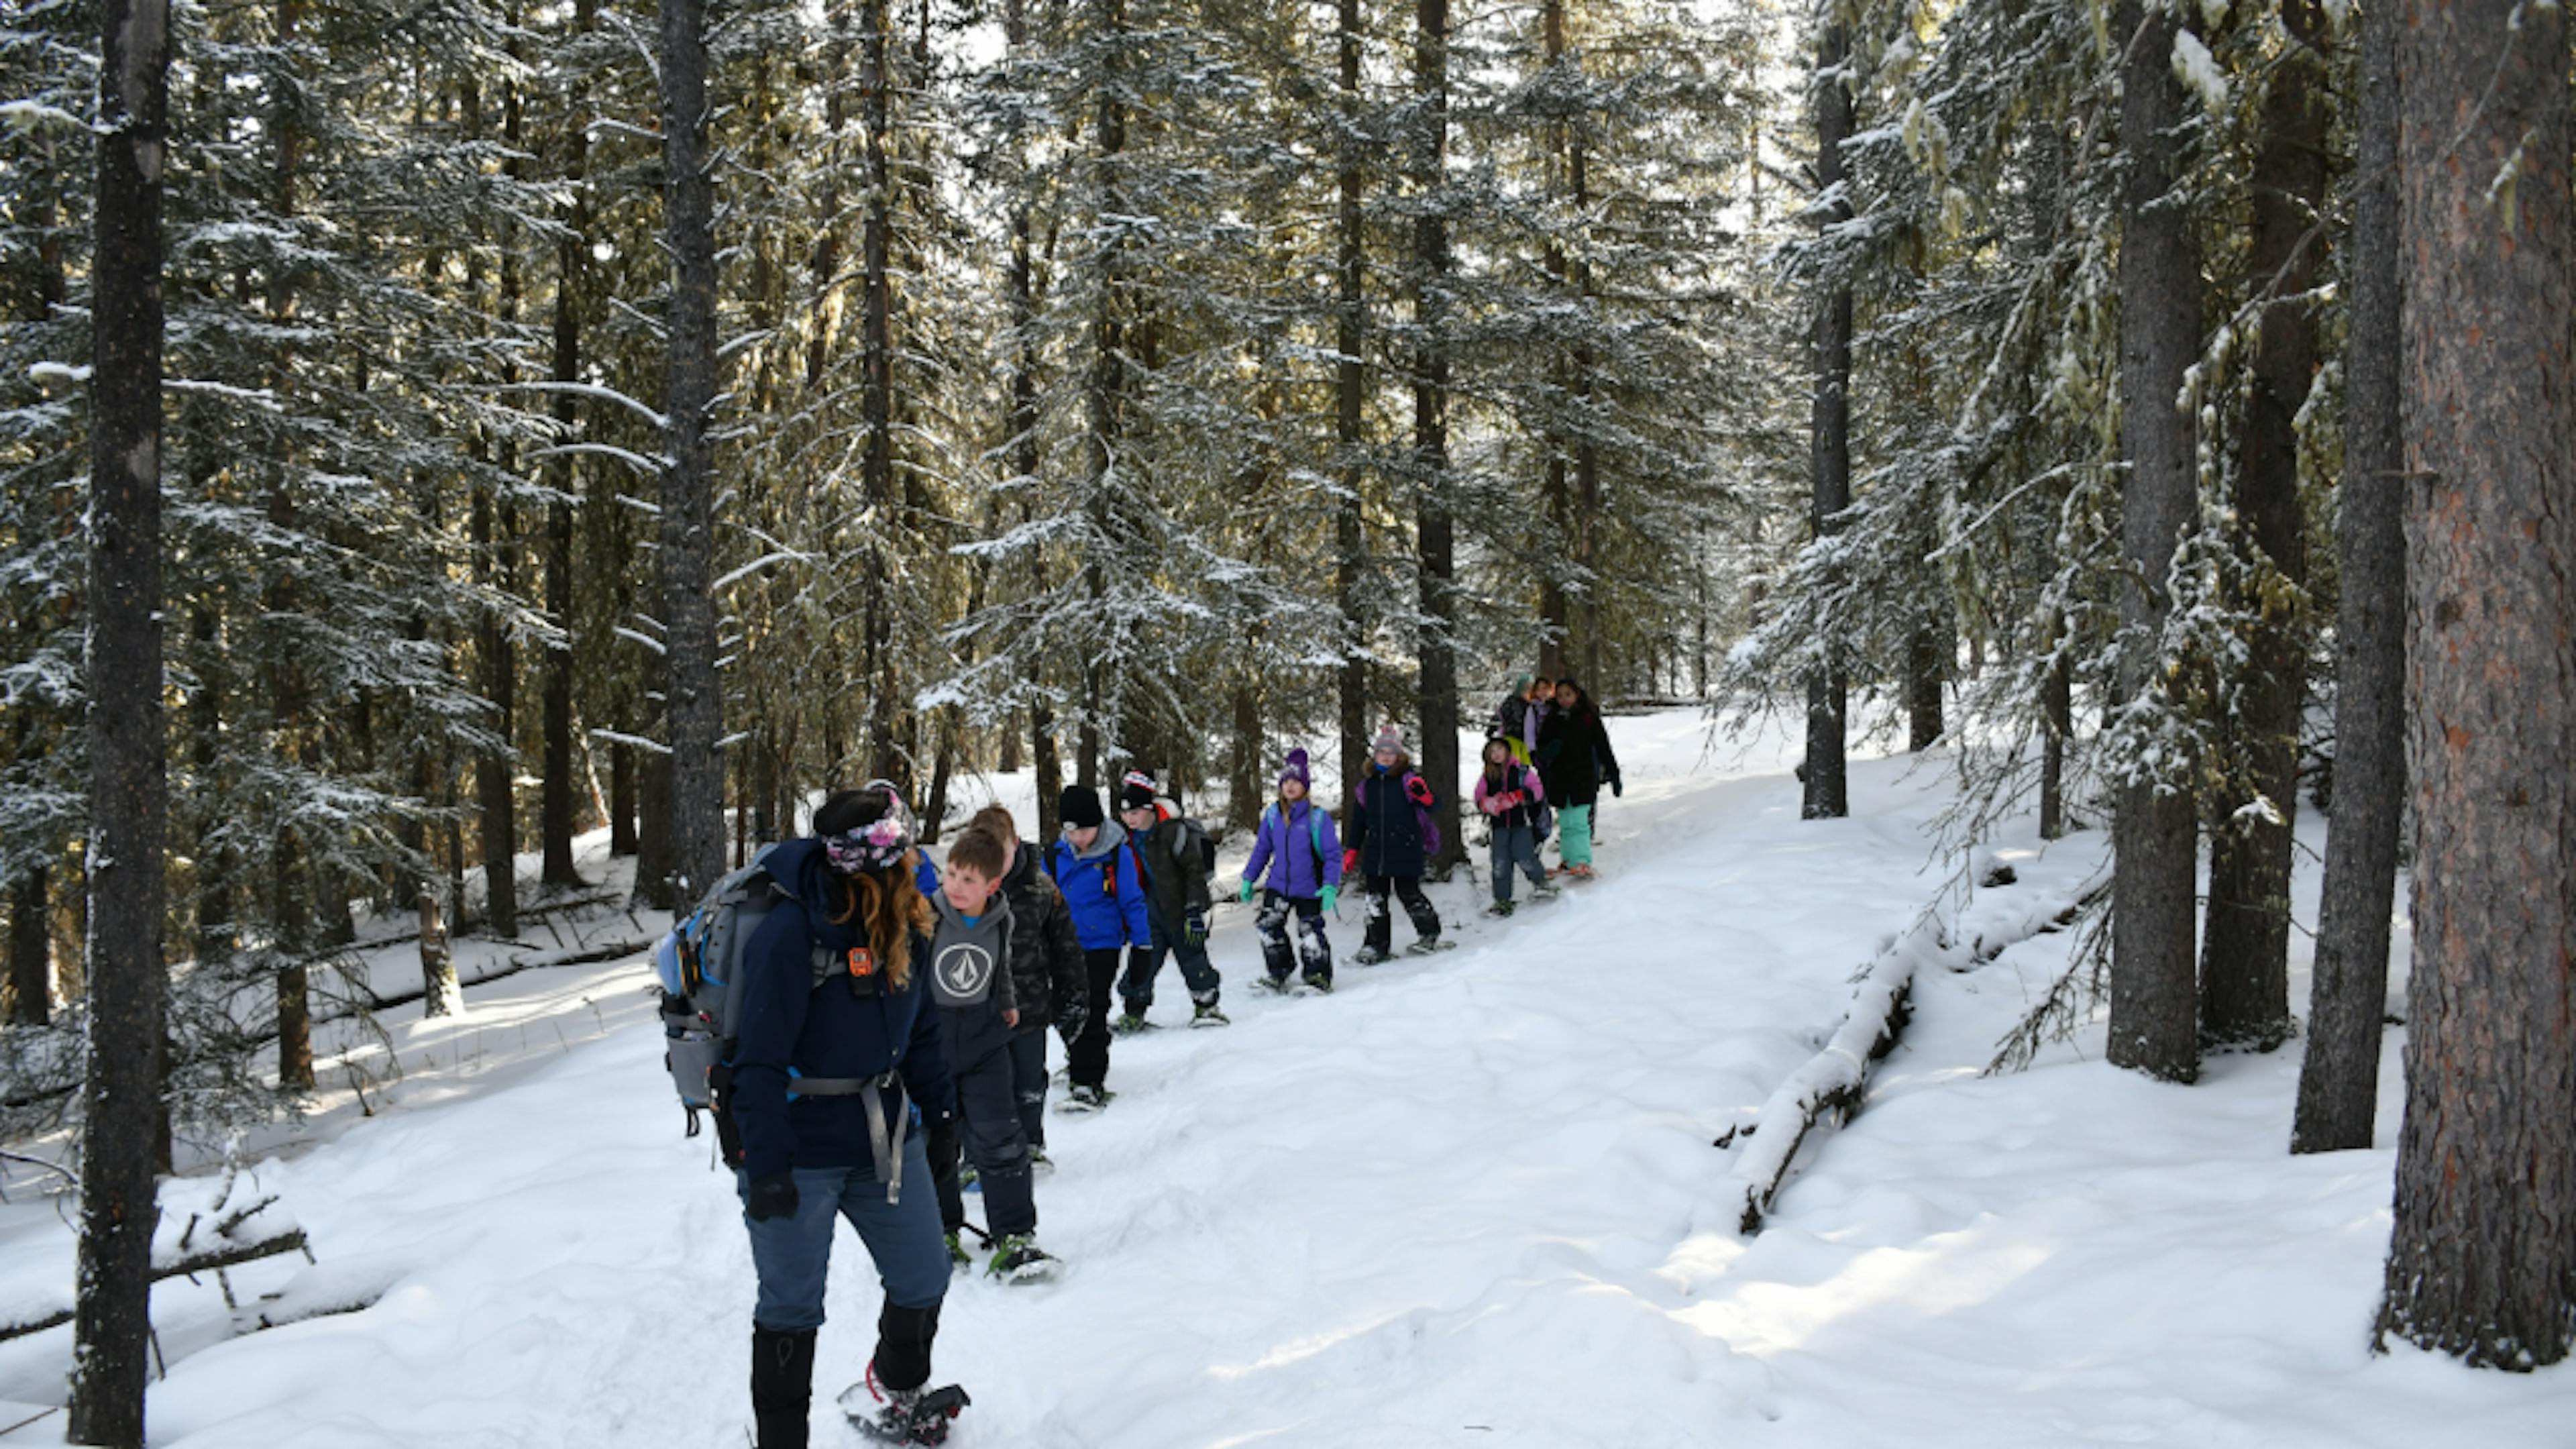 A group of snowshoers trudge through a snowy forest